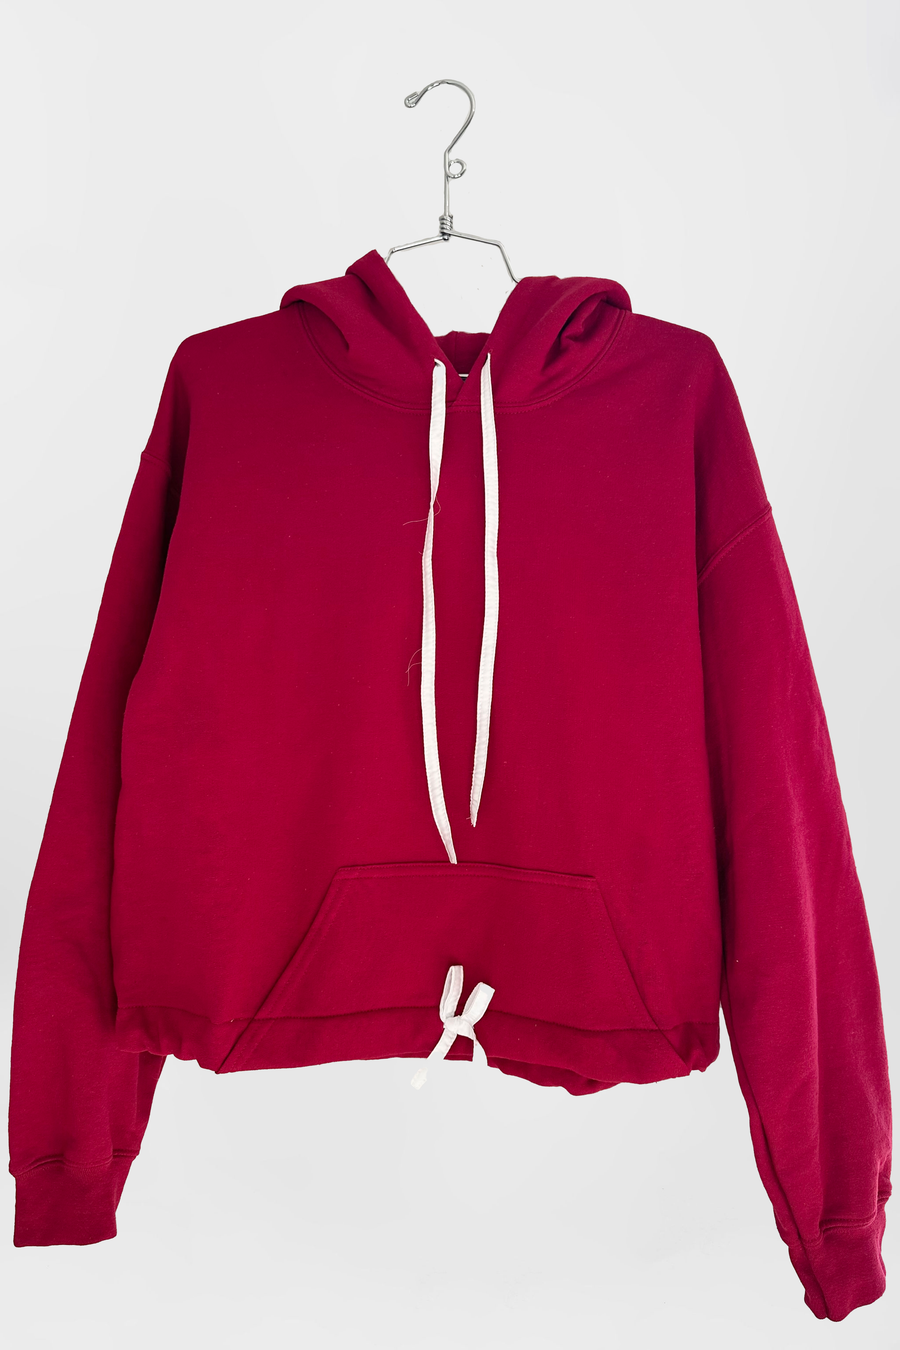 Cropped Hoodie Red *Limited*Edition*